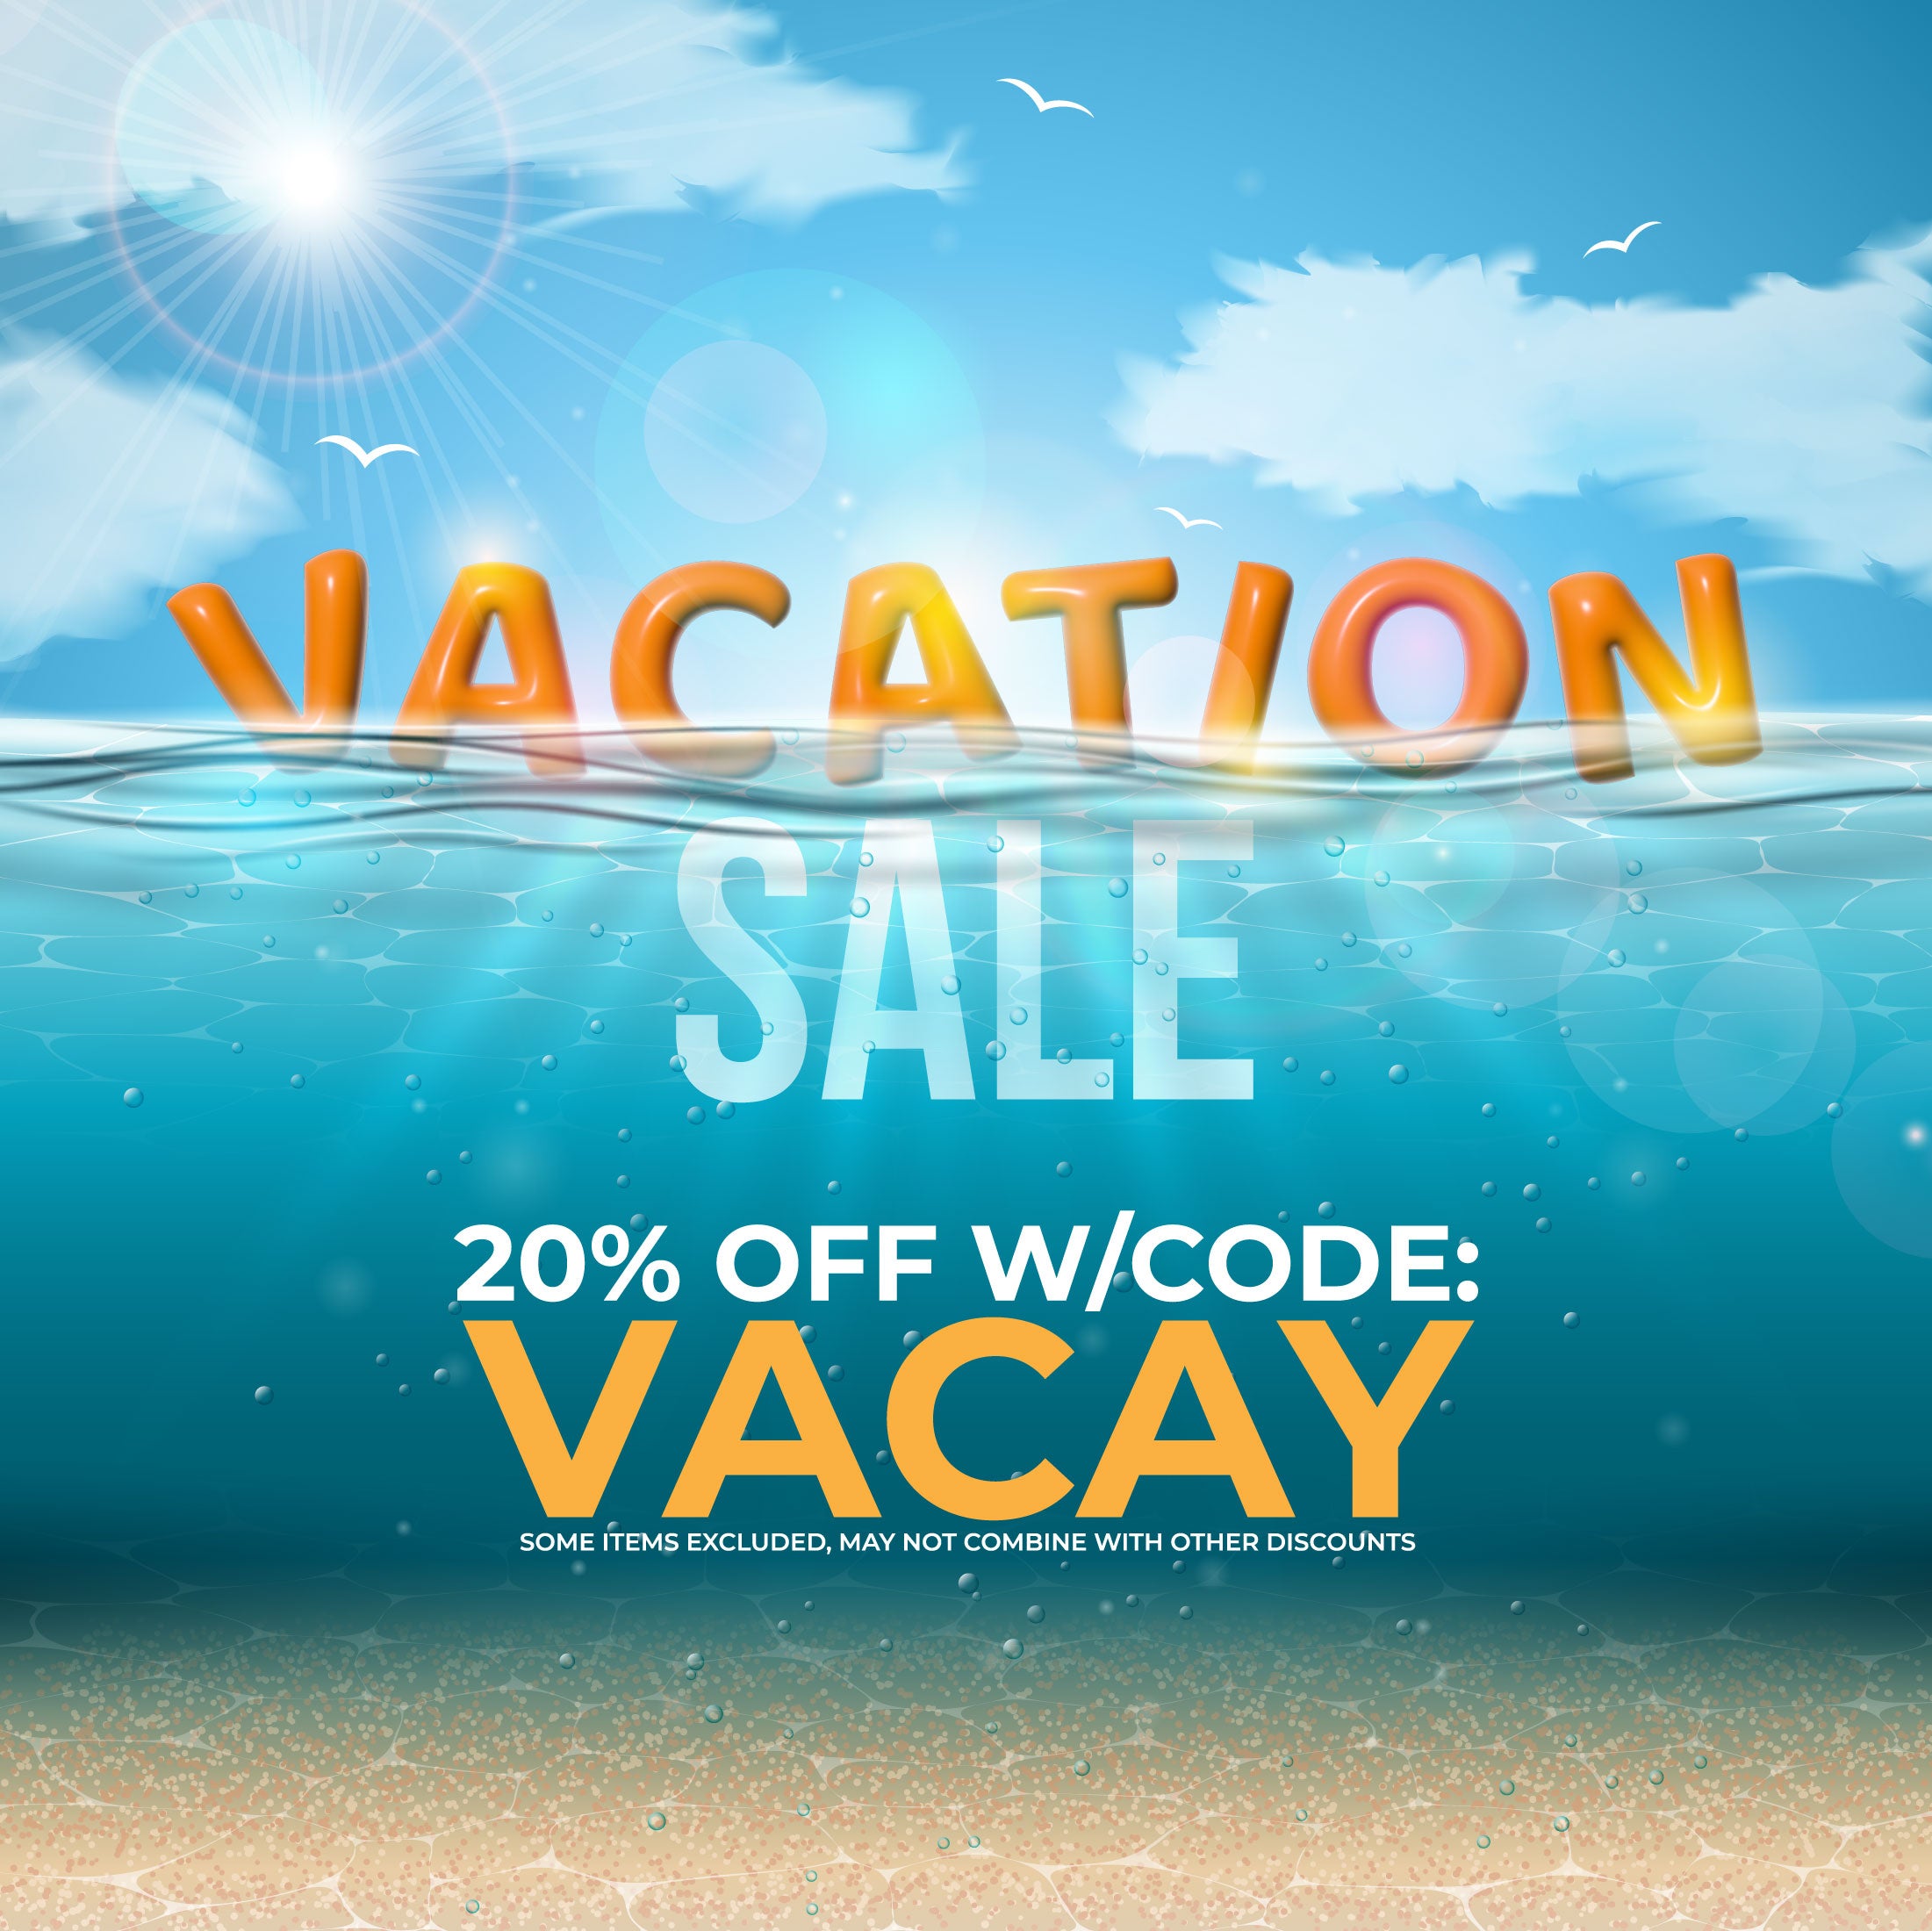 Promotional Image for Sauce Warehouse Vacation Sale